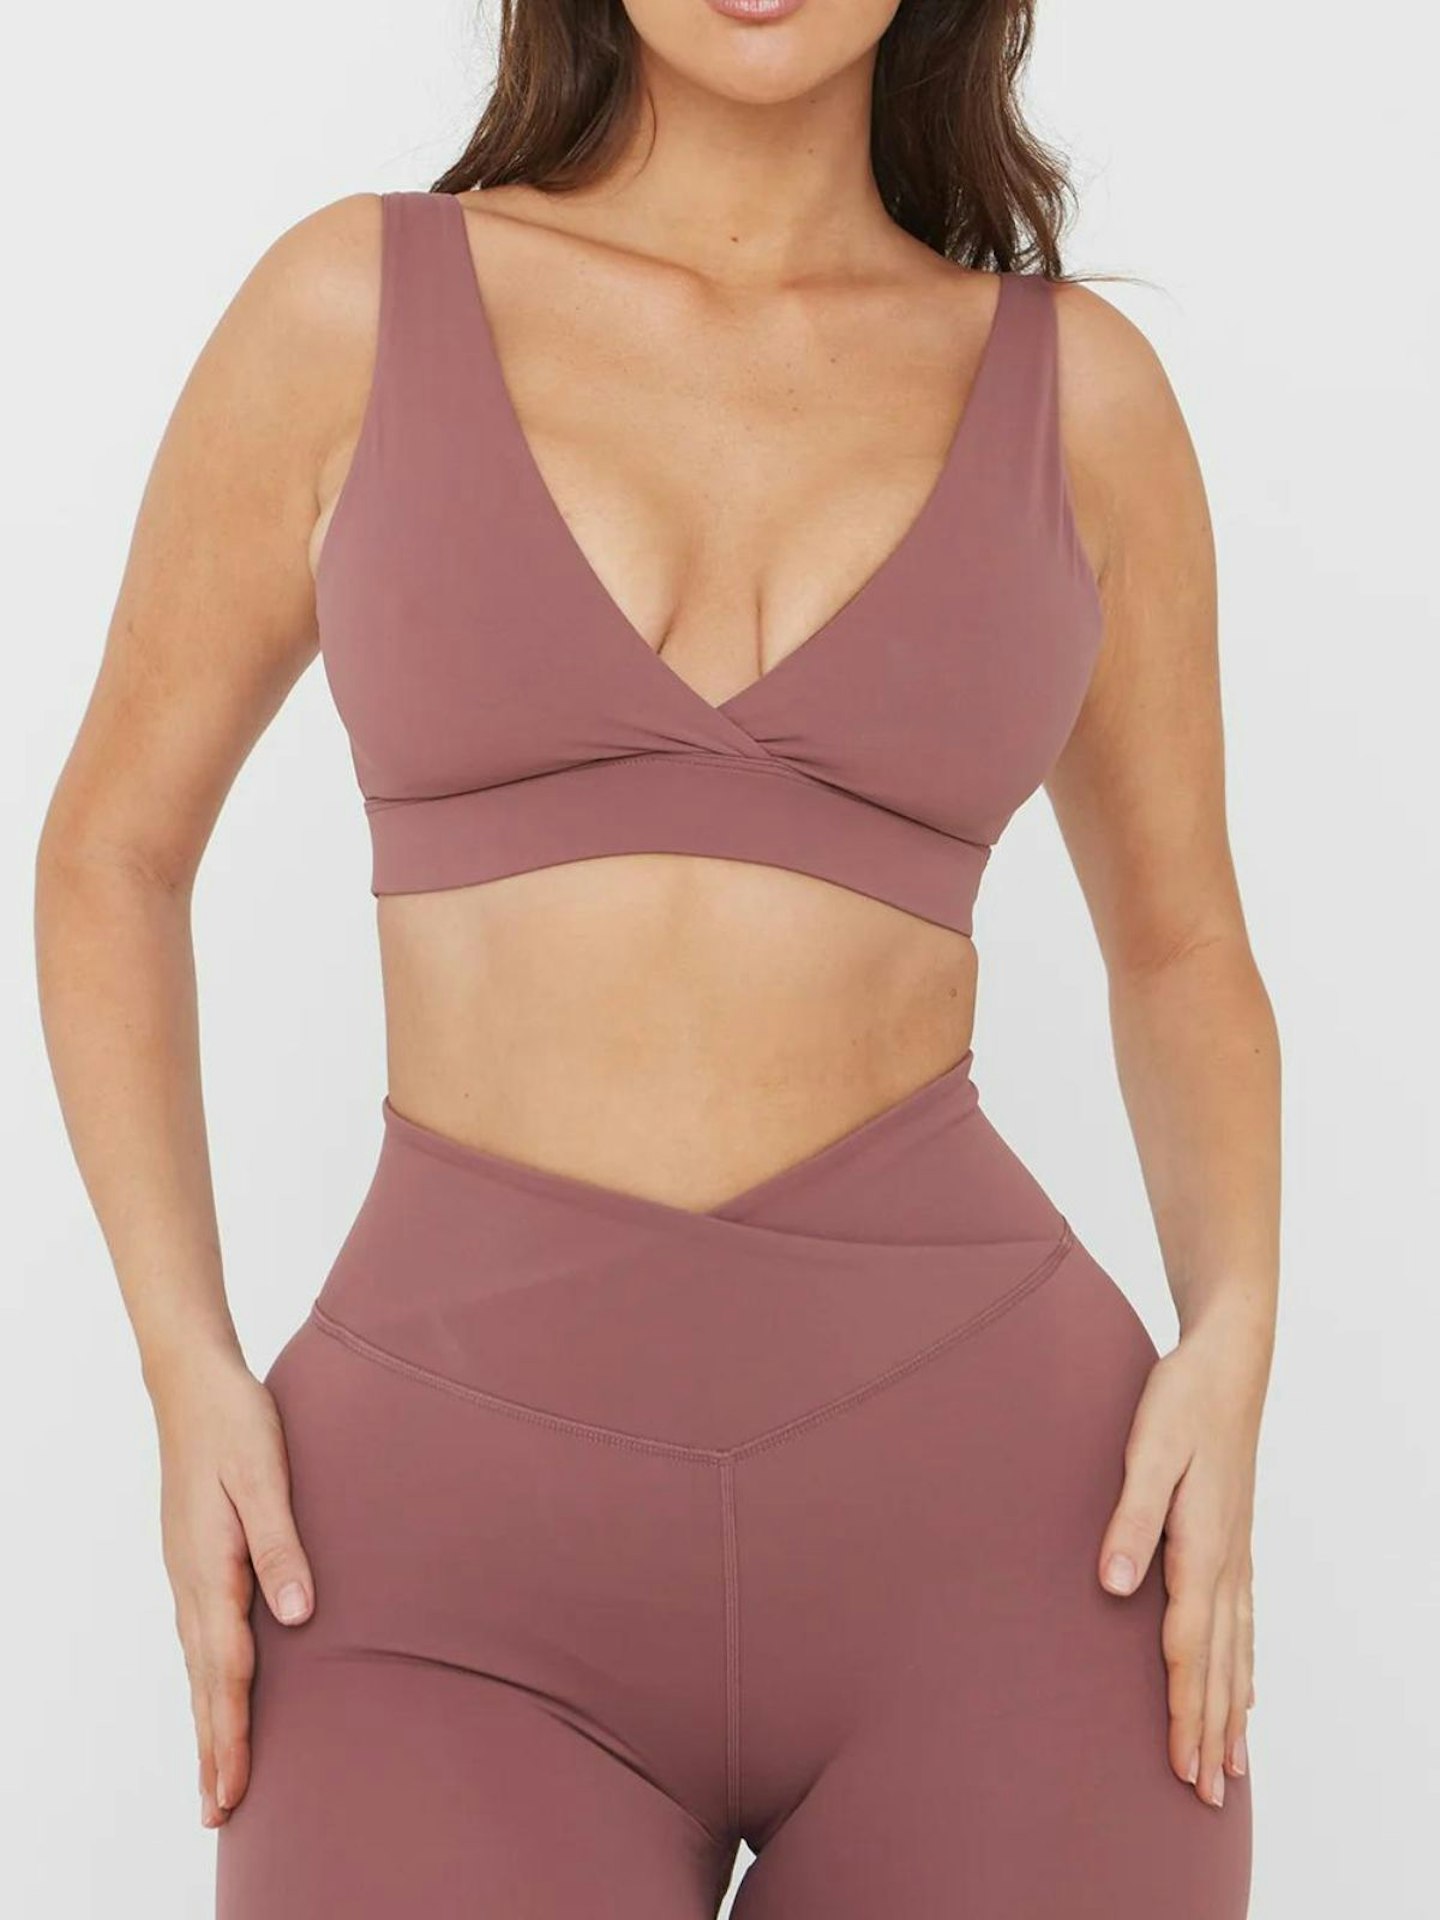 8 Lululemon Dupes That Can Save You Some Serious Cash This Winter